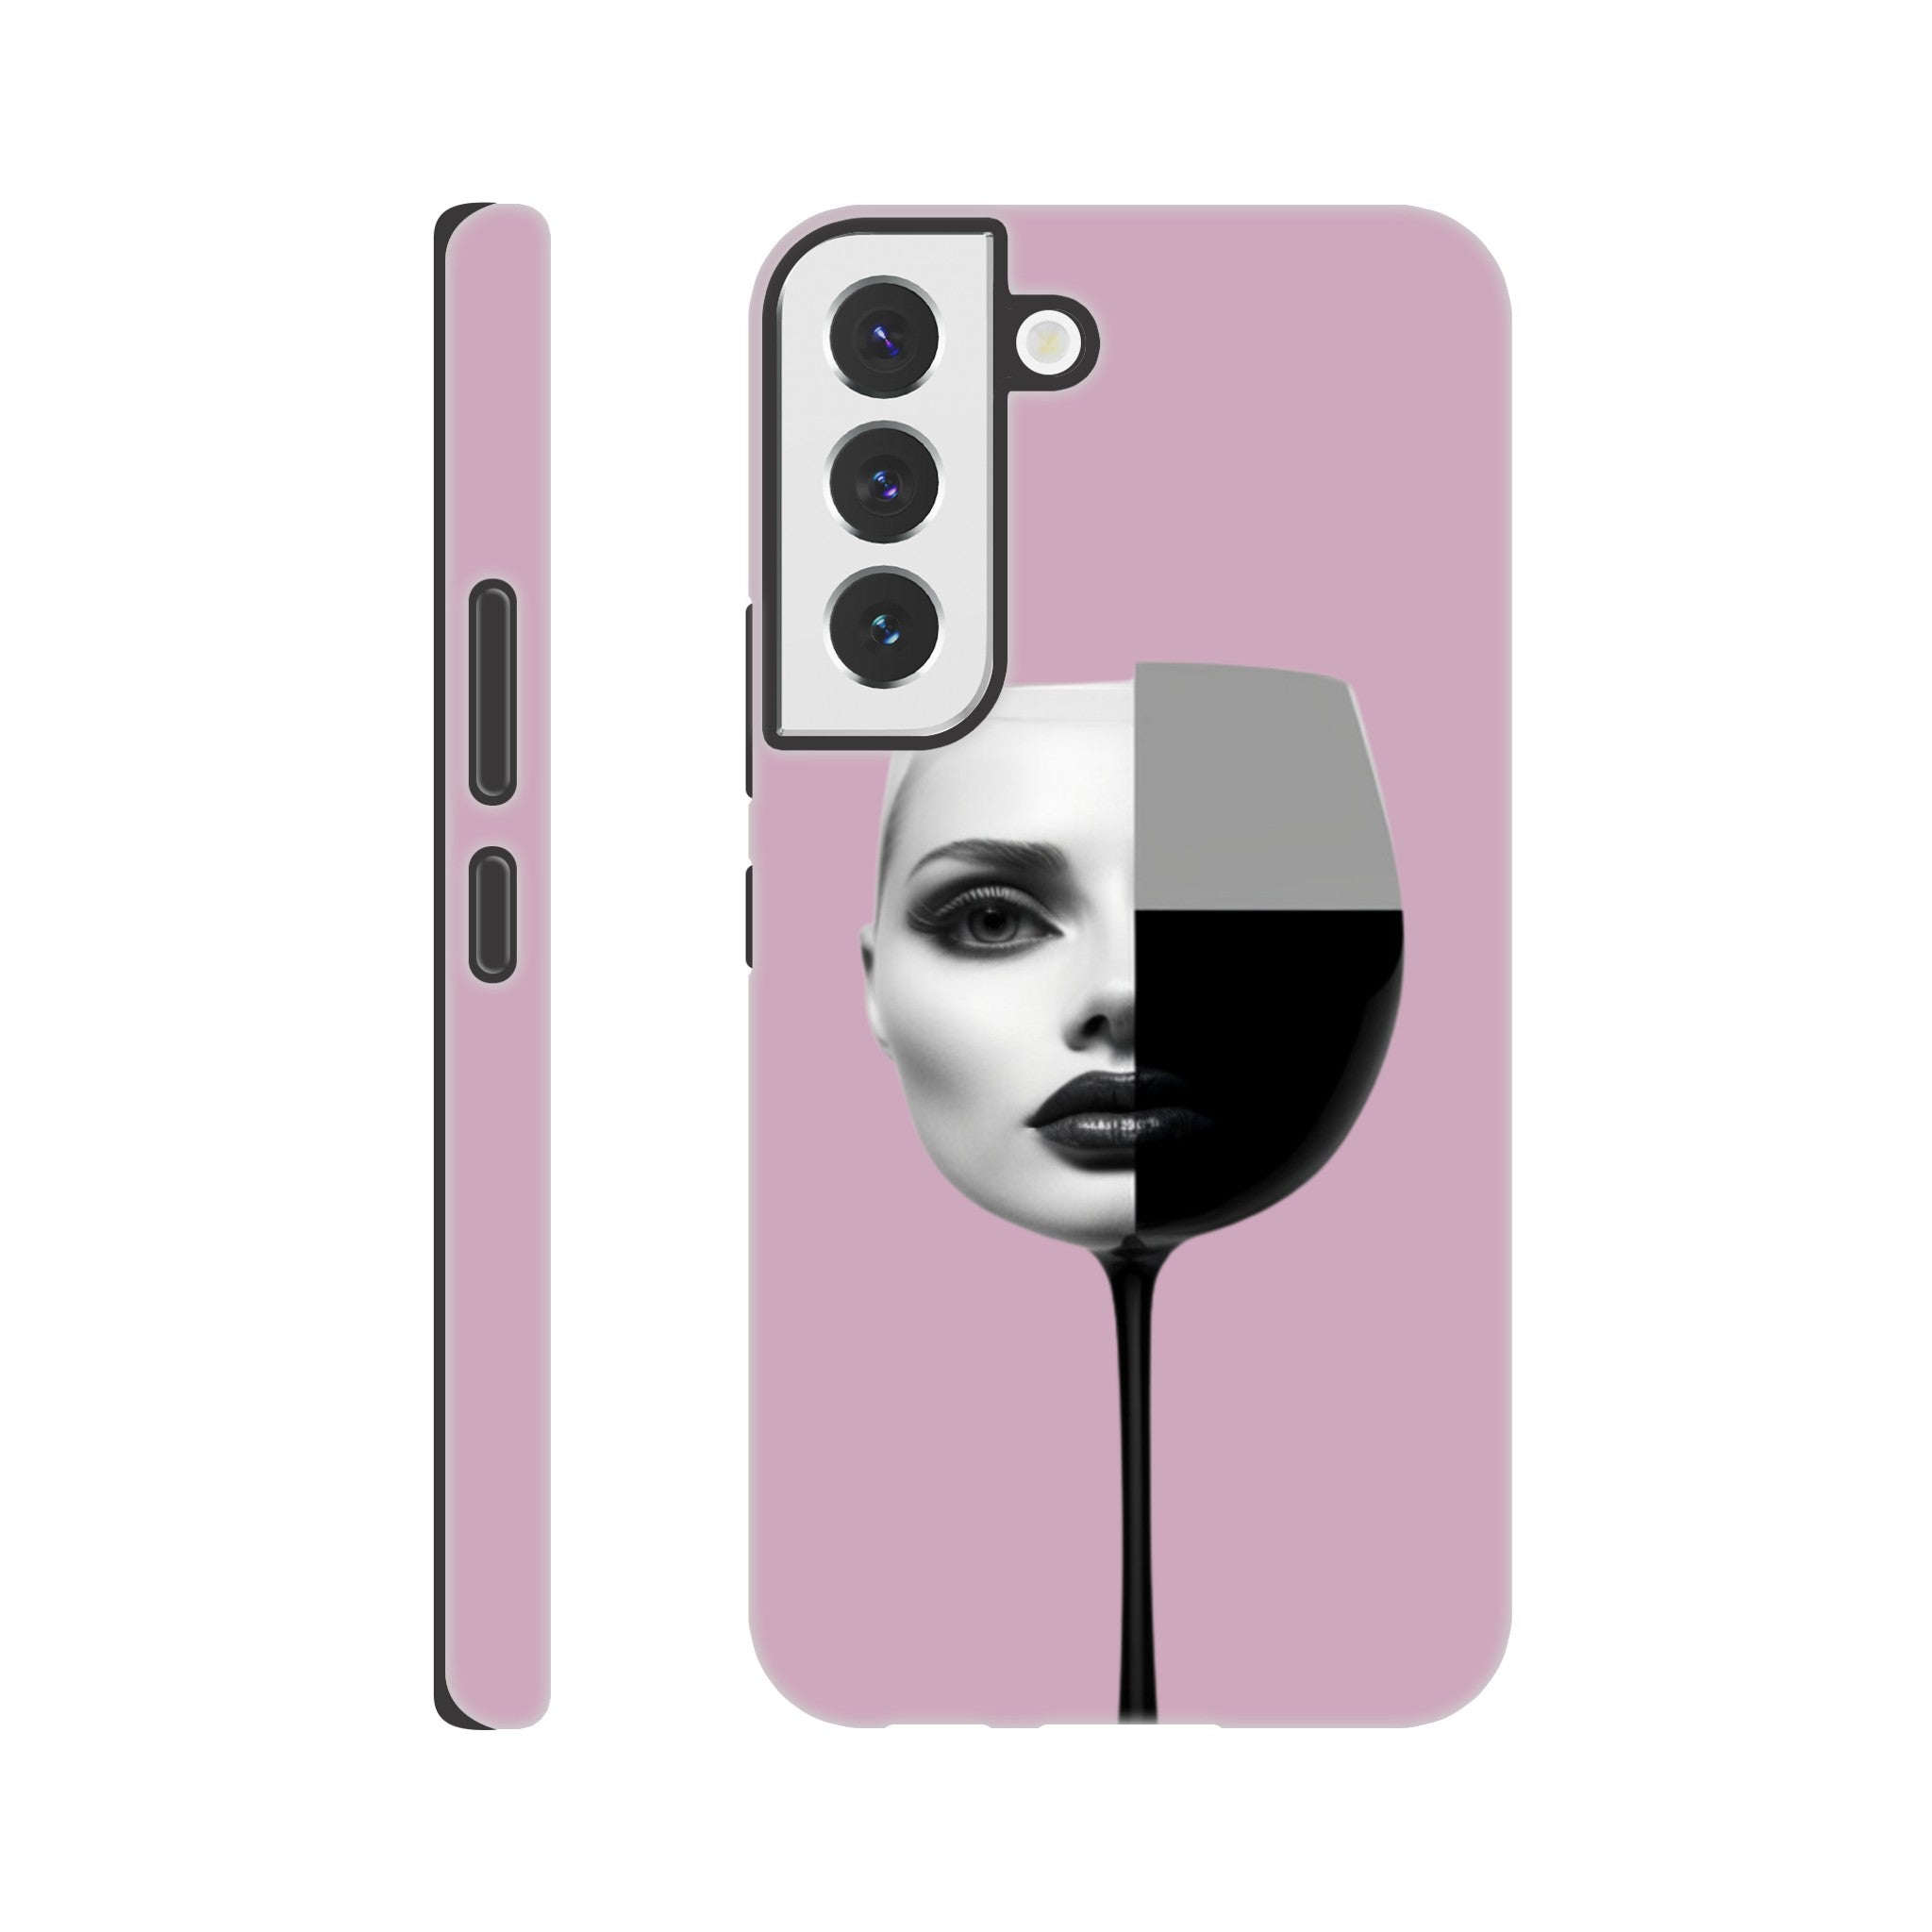 Silhouette Series: Artistic Wine Glass Phone Cases